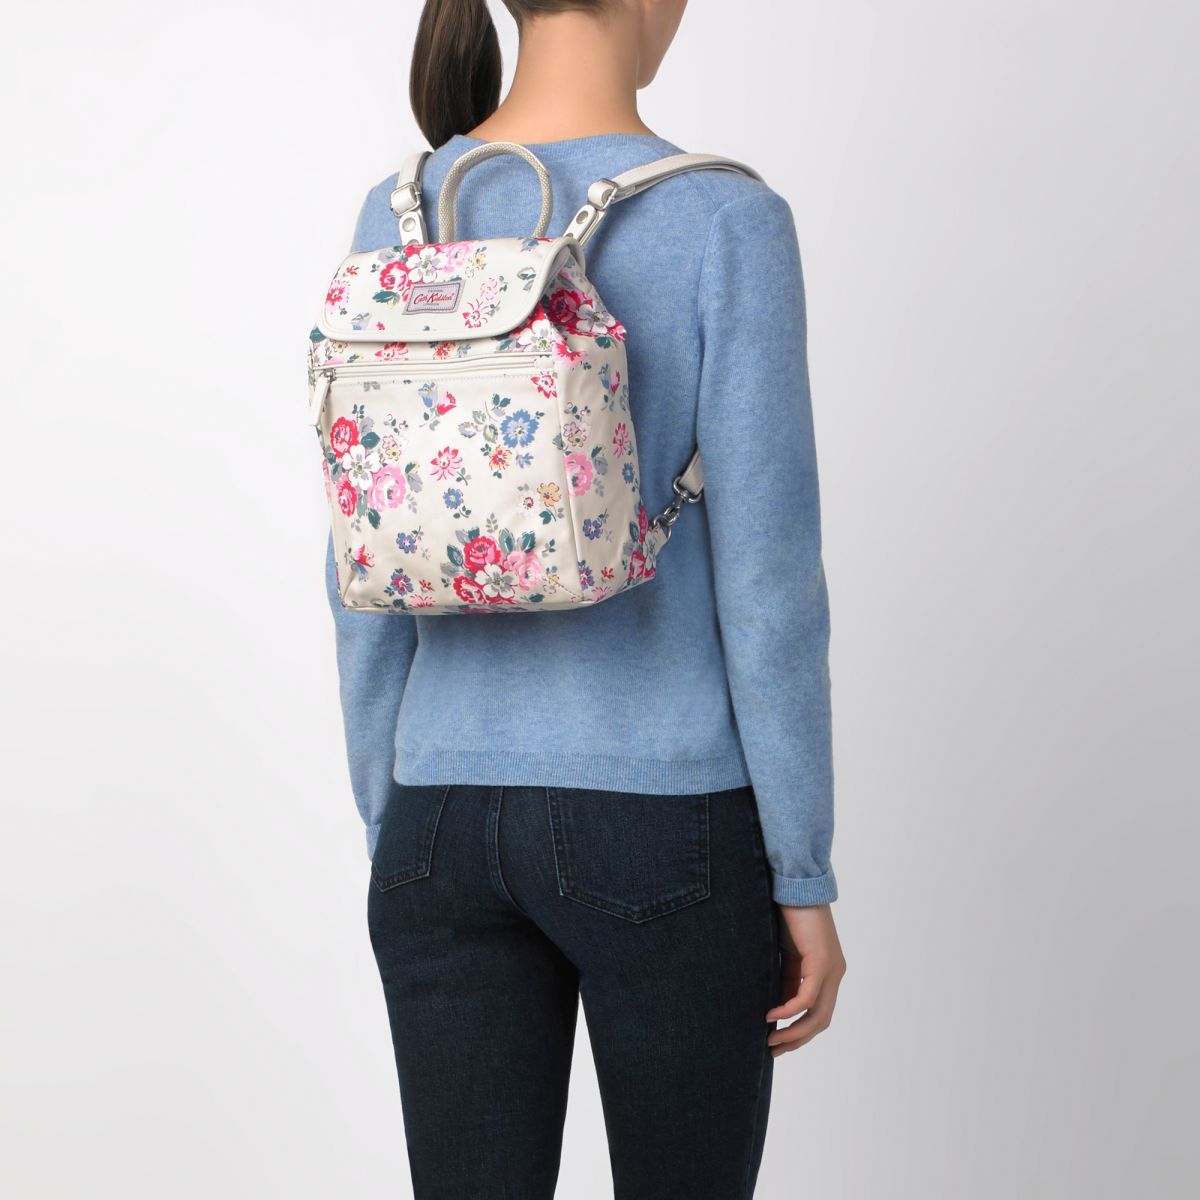 cath kidston backpack size